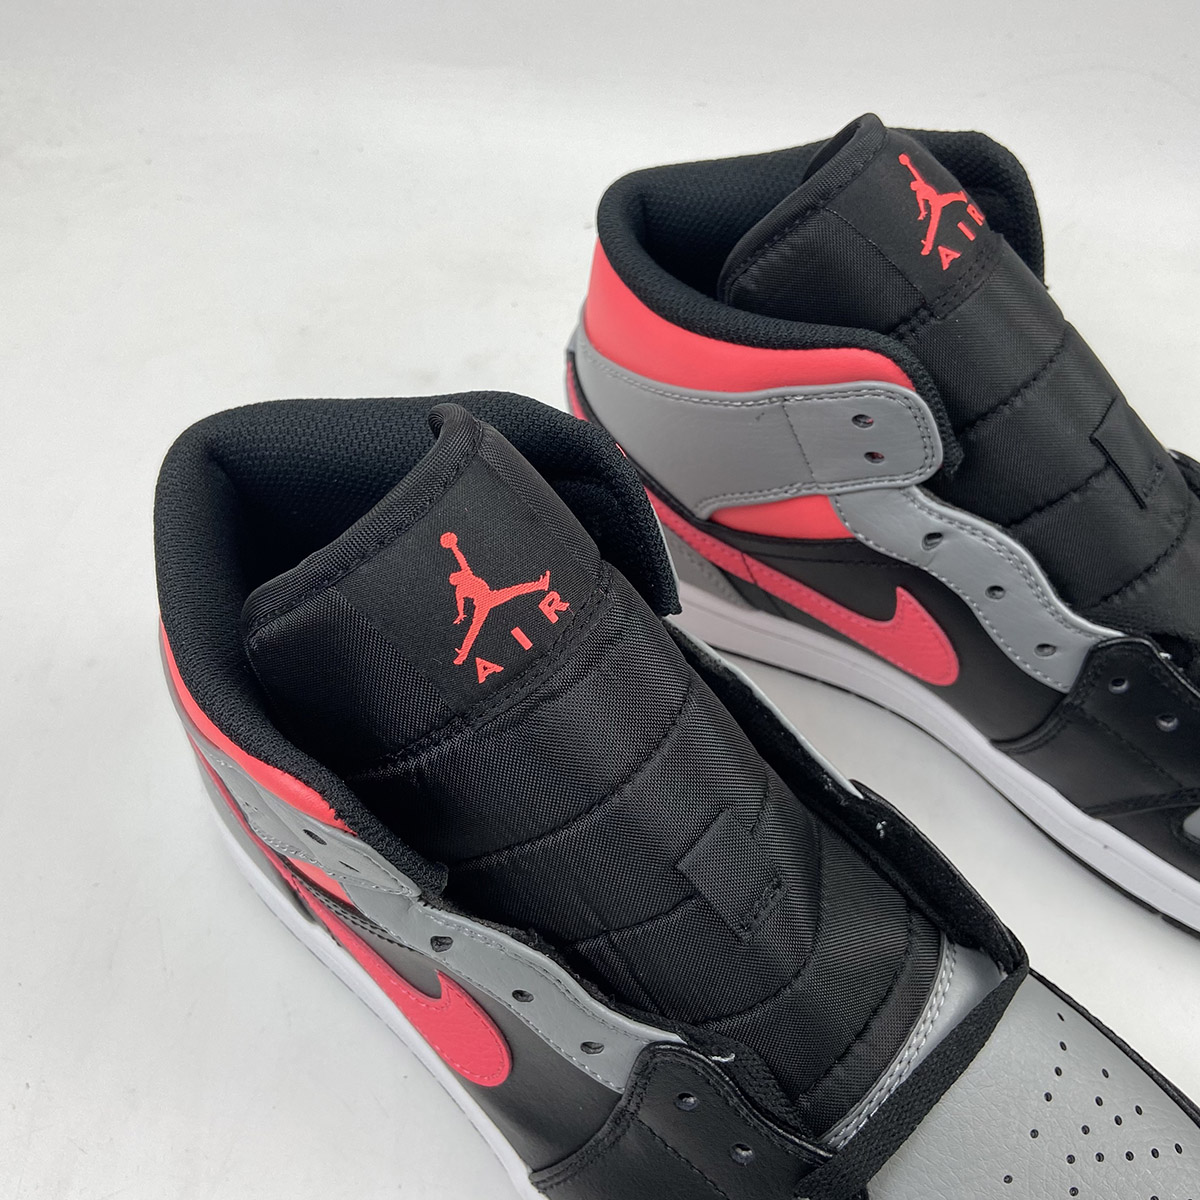 Air Jordan 1 Mid “Pink Shadow” For Sale – The Sole Line